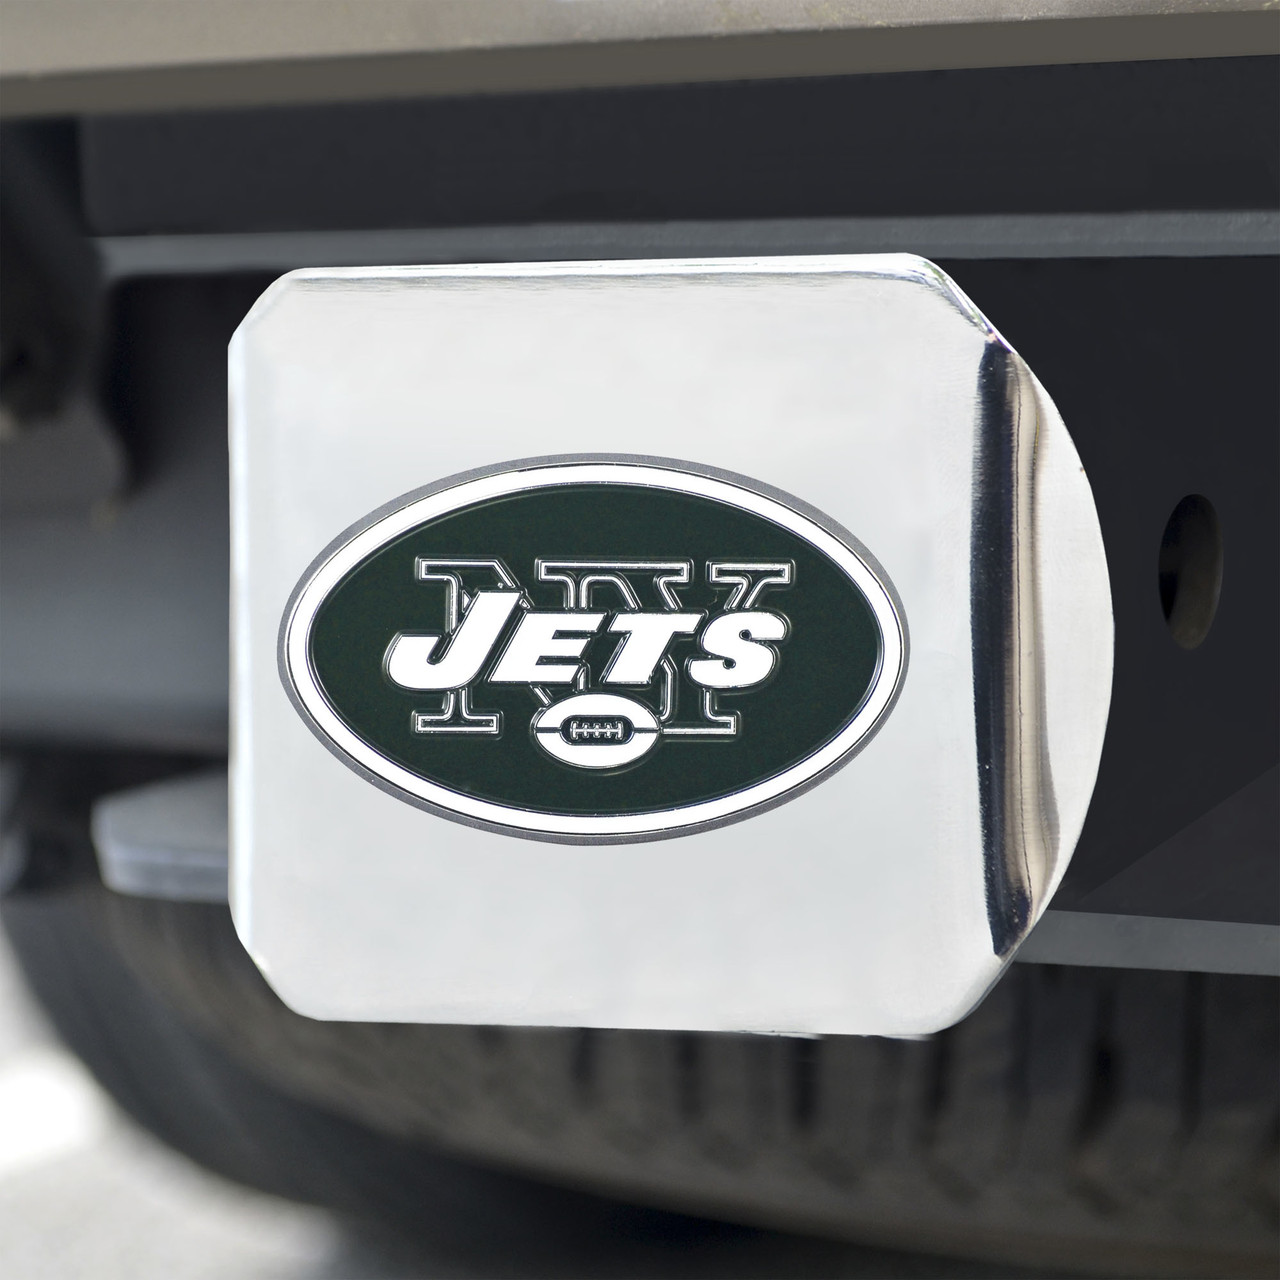 Fanmats New York Jets NFL Chrome Metal Hitch Cover with 3D Colored Team Logo by FANMATS - Unique Team Logo Molded Design - Easy Installa